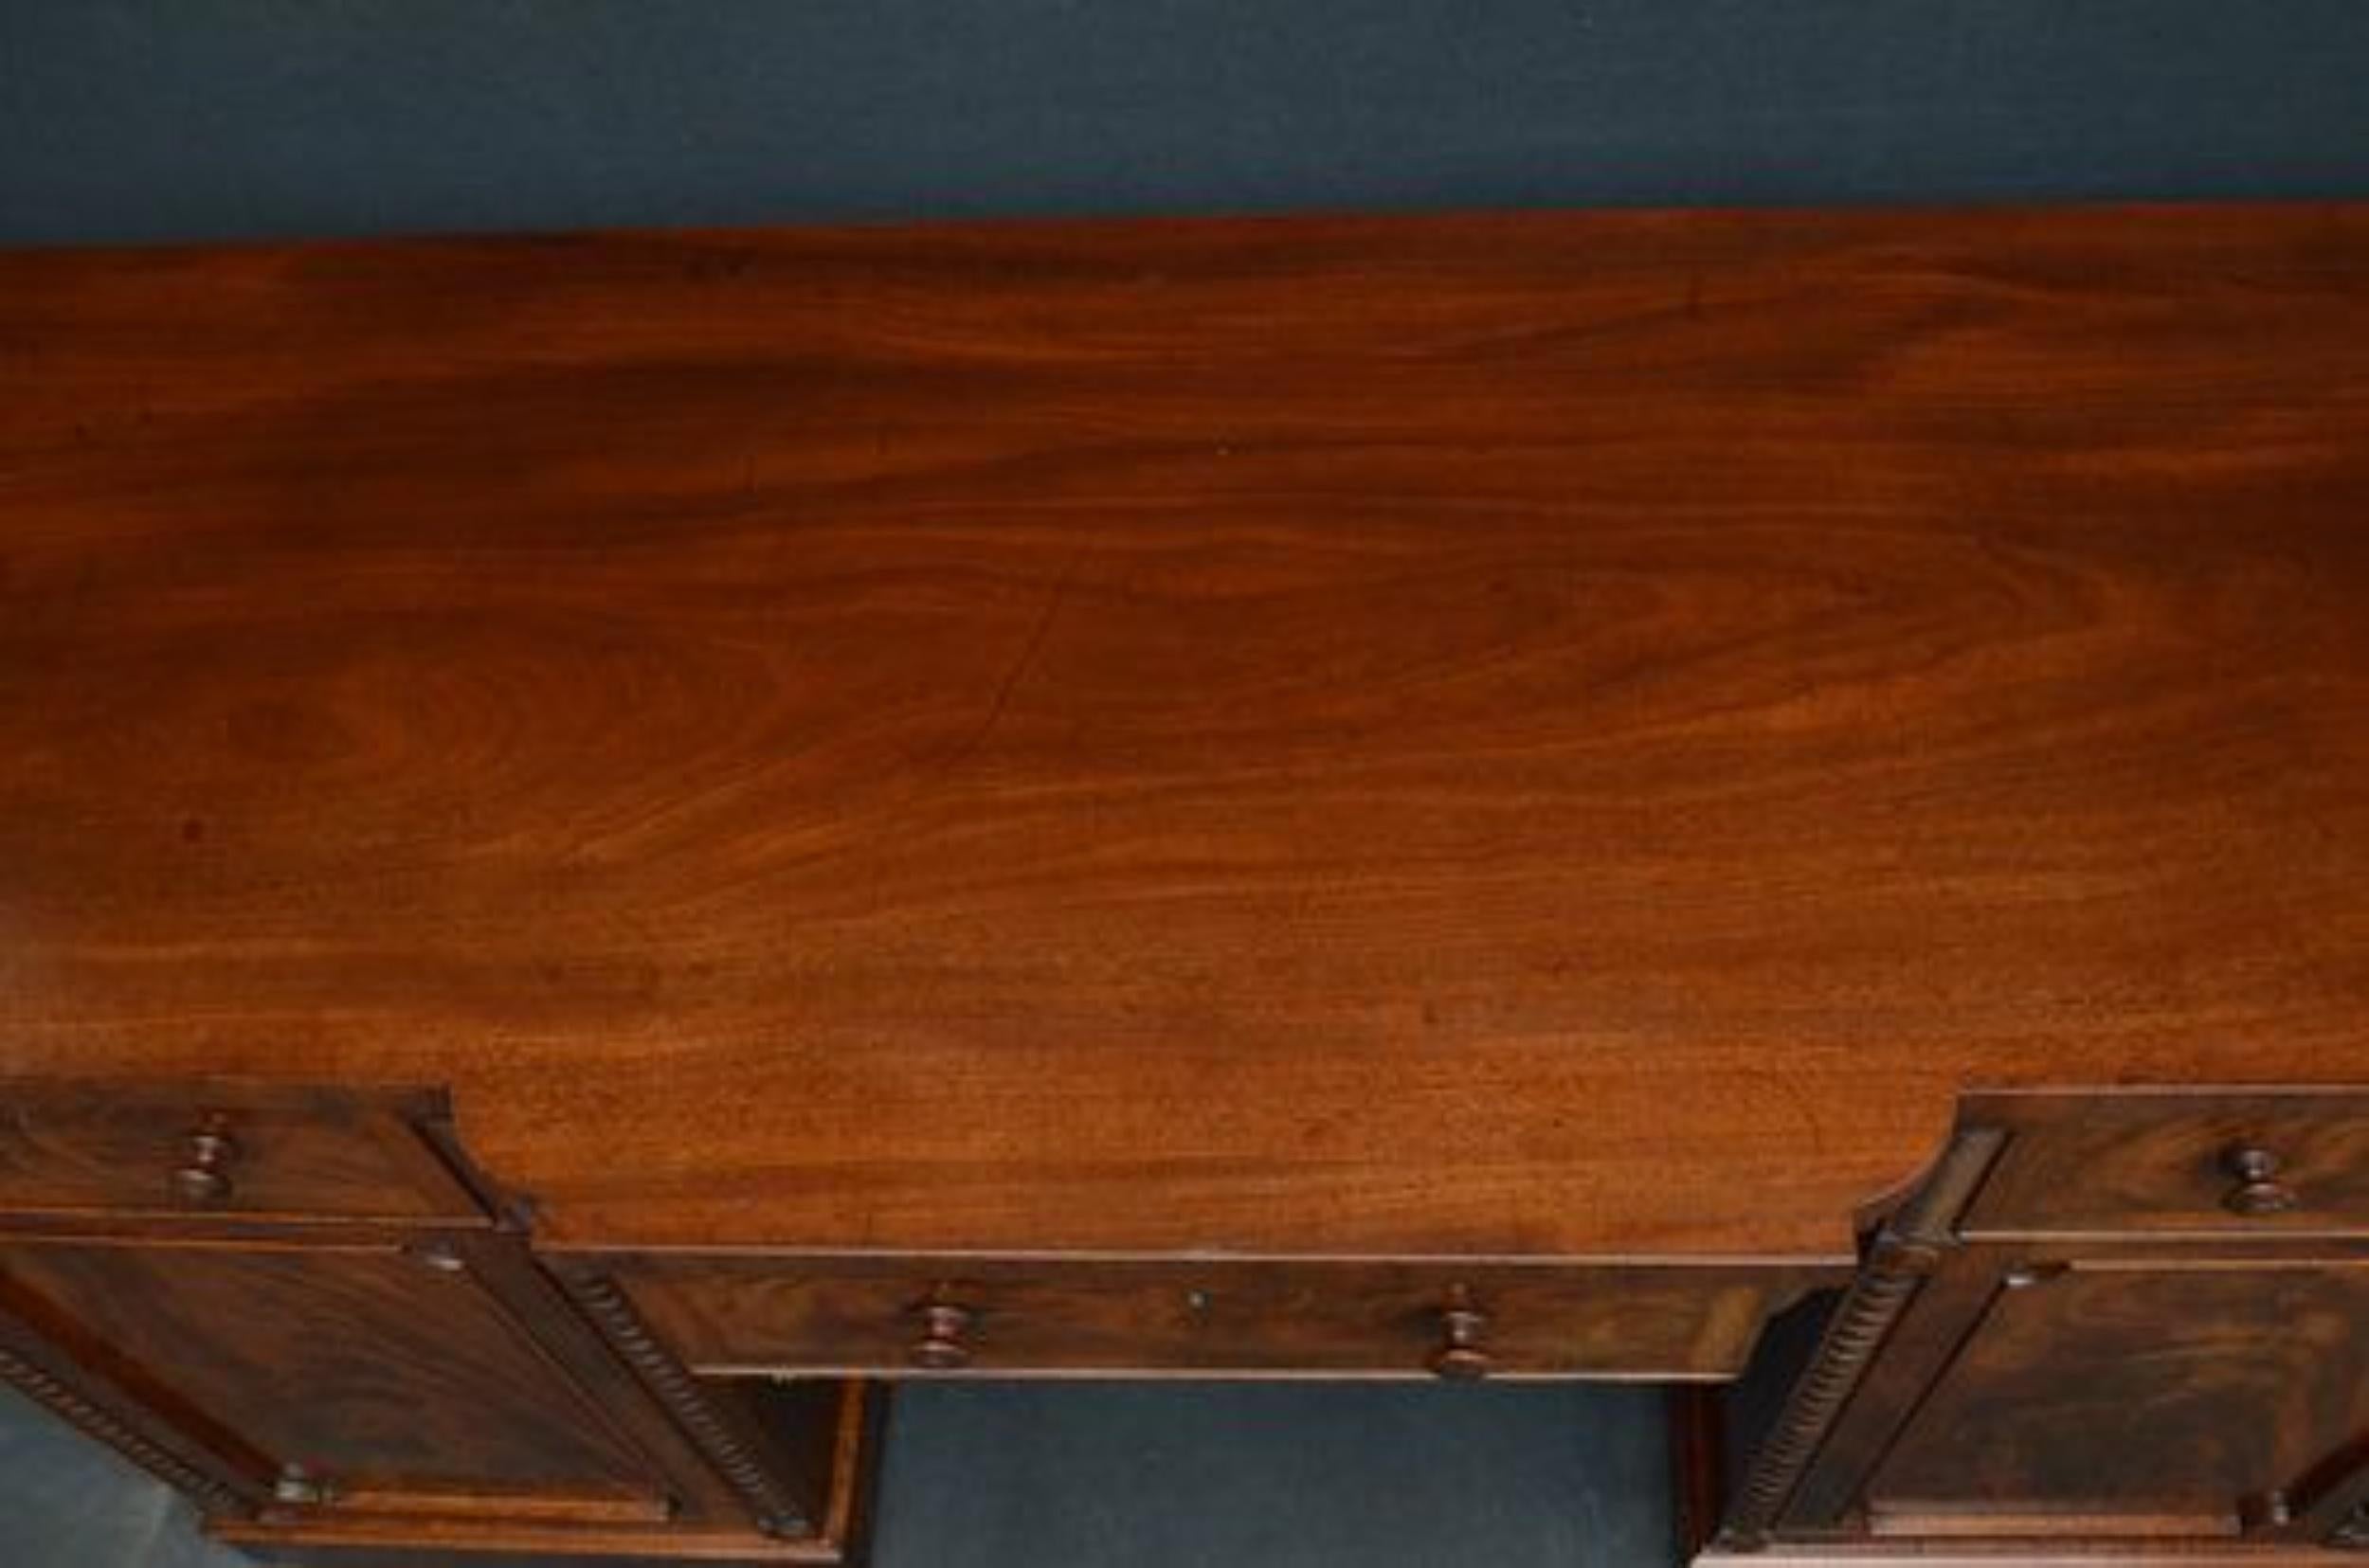 Sn033 Fine and unusual Regency, mahogany, breakfronted, pedestal sideboard, having figured top above frieze drawer with carved apron below, all flanked by full length, panelled, flamed mahogany cupboard door, all fitted with original turned knobs